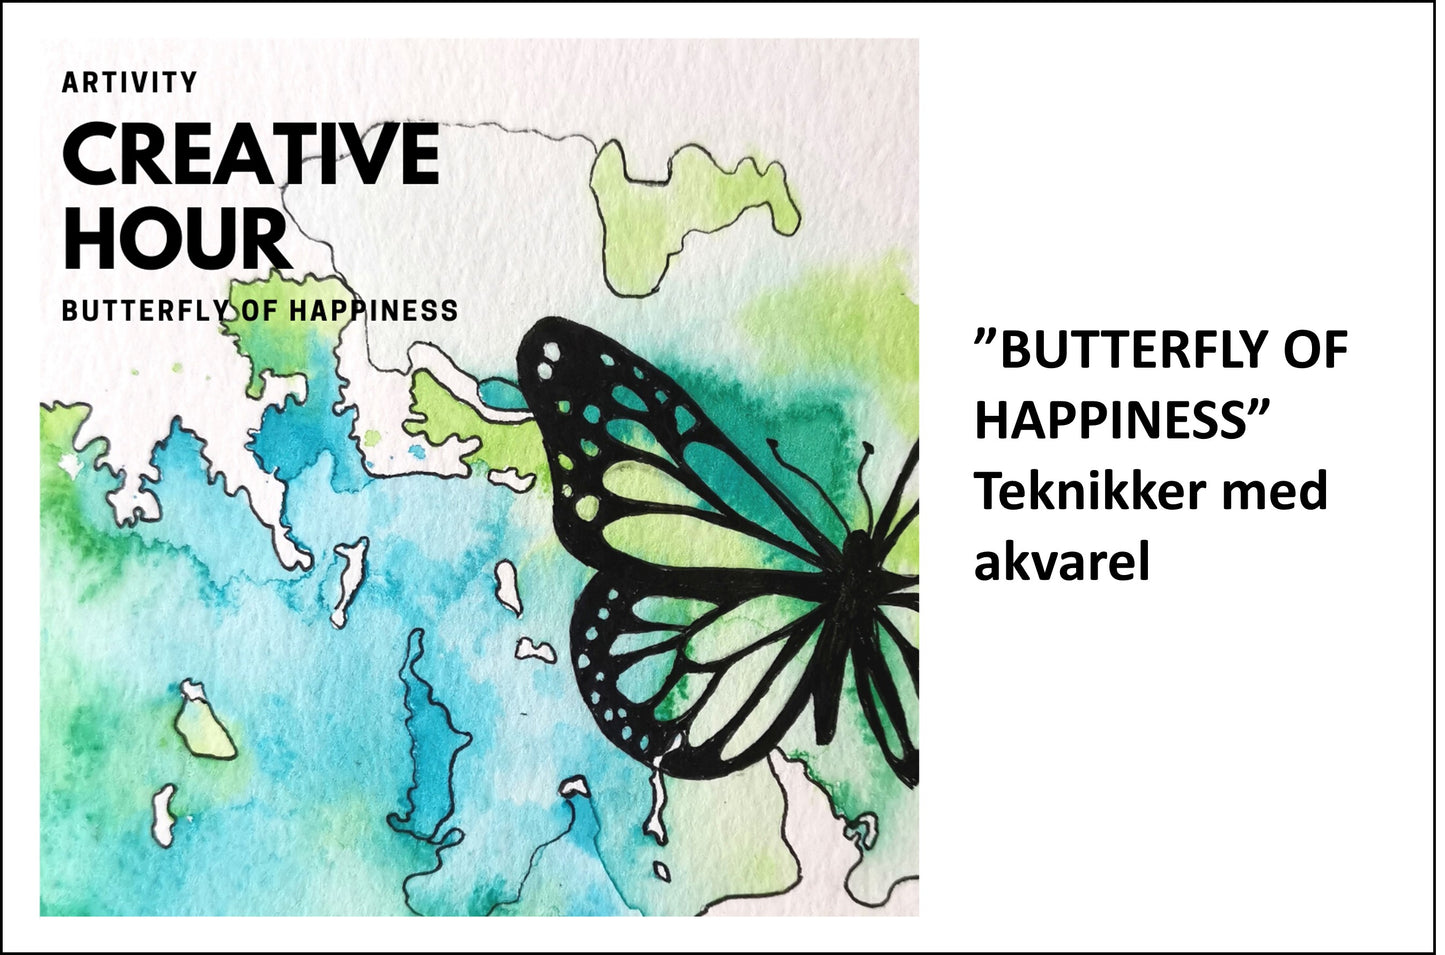 Creative hour - BUTTERFLY OF HAPPINESS